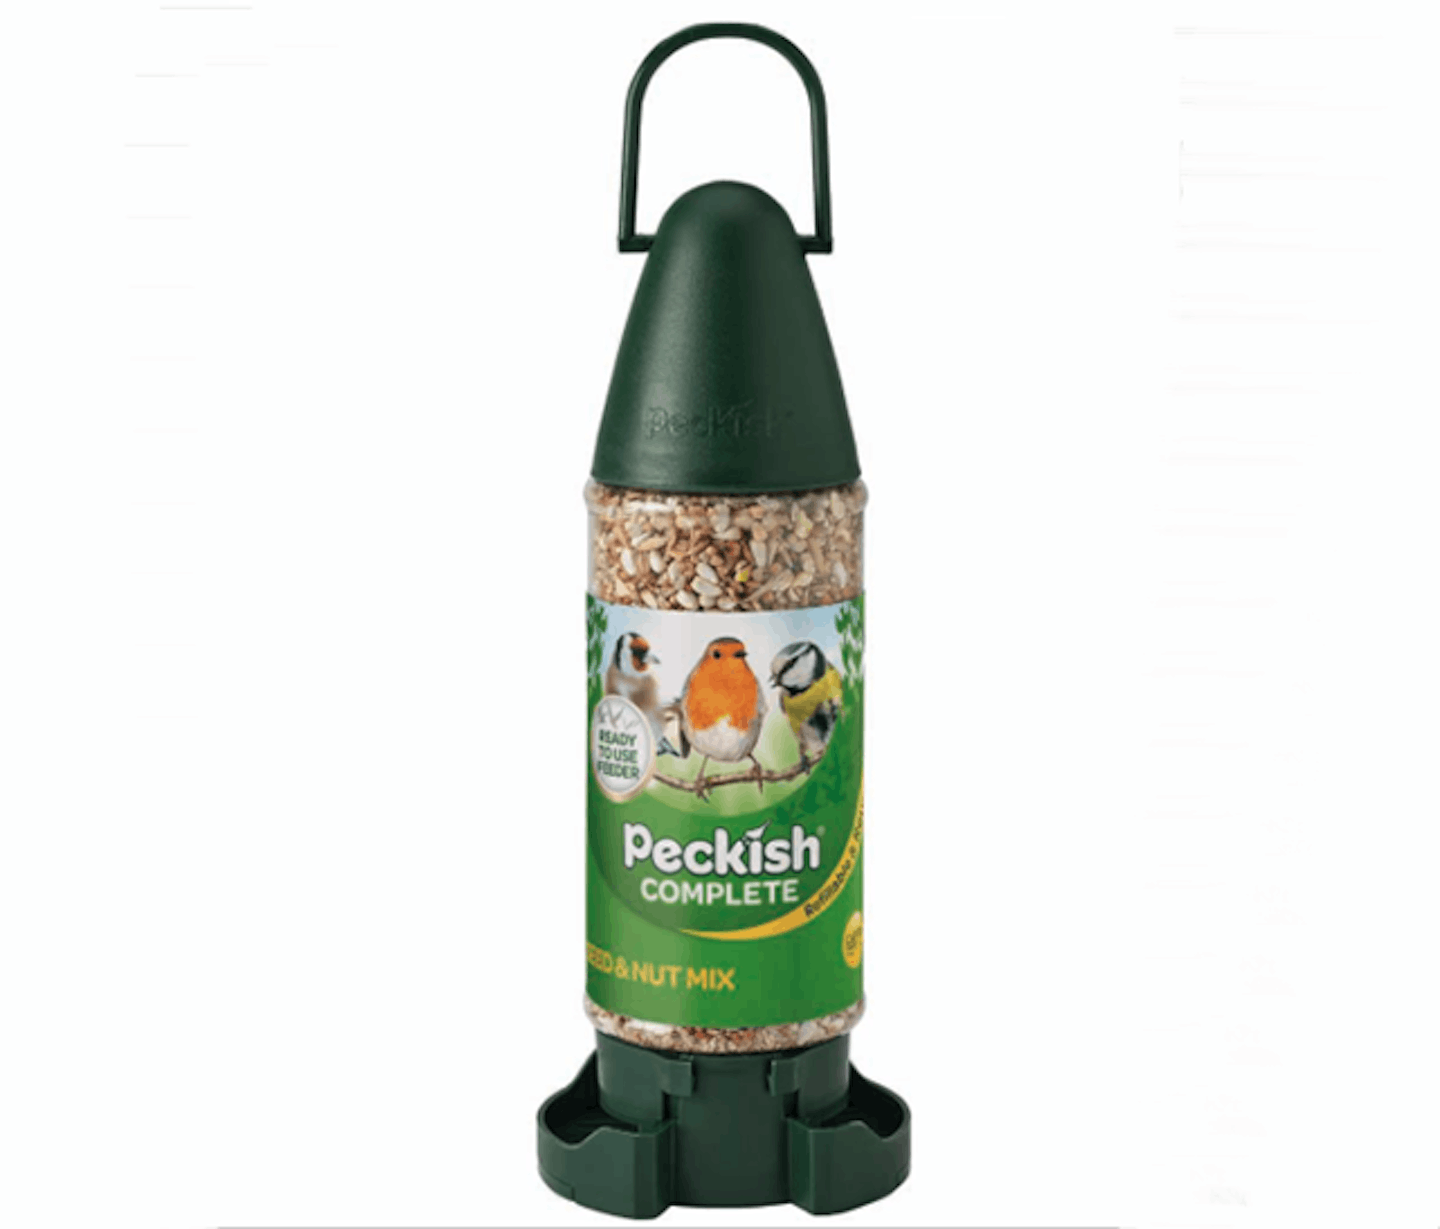 Peckish Wild Bird Complete Seed Mix and Feeder